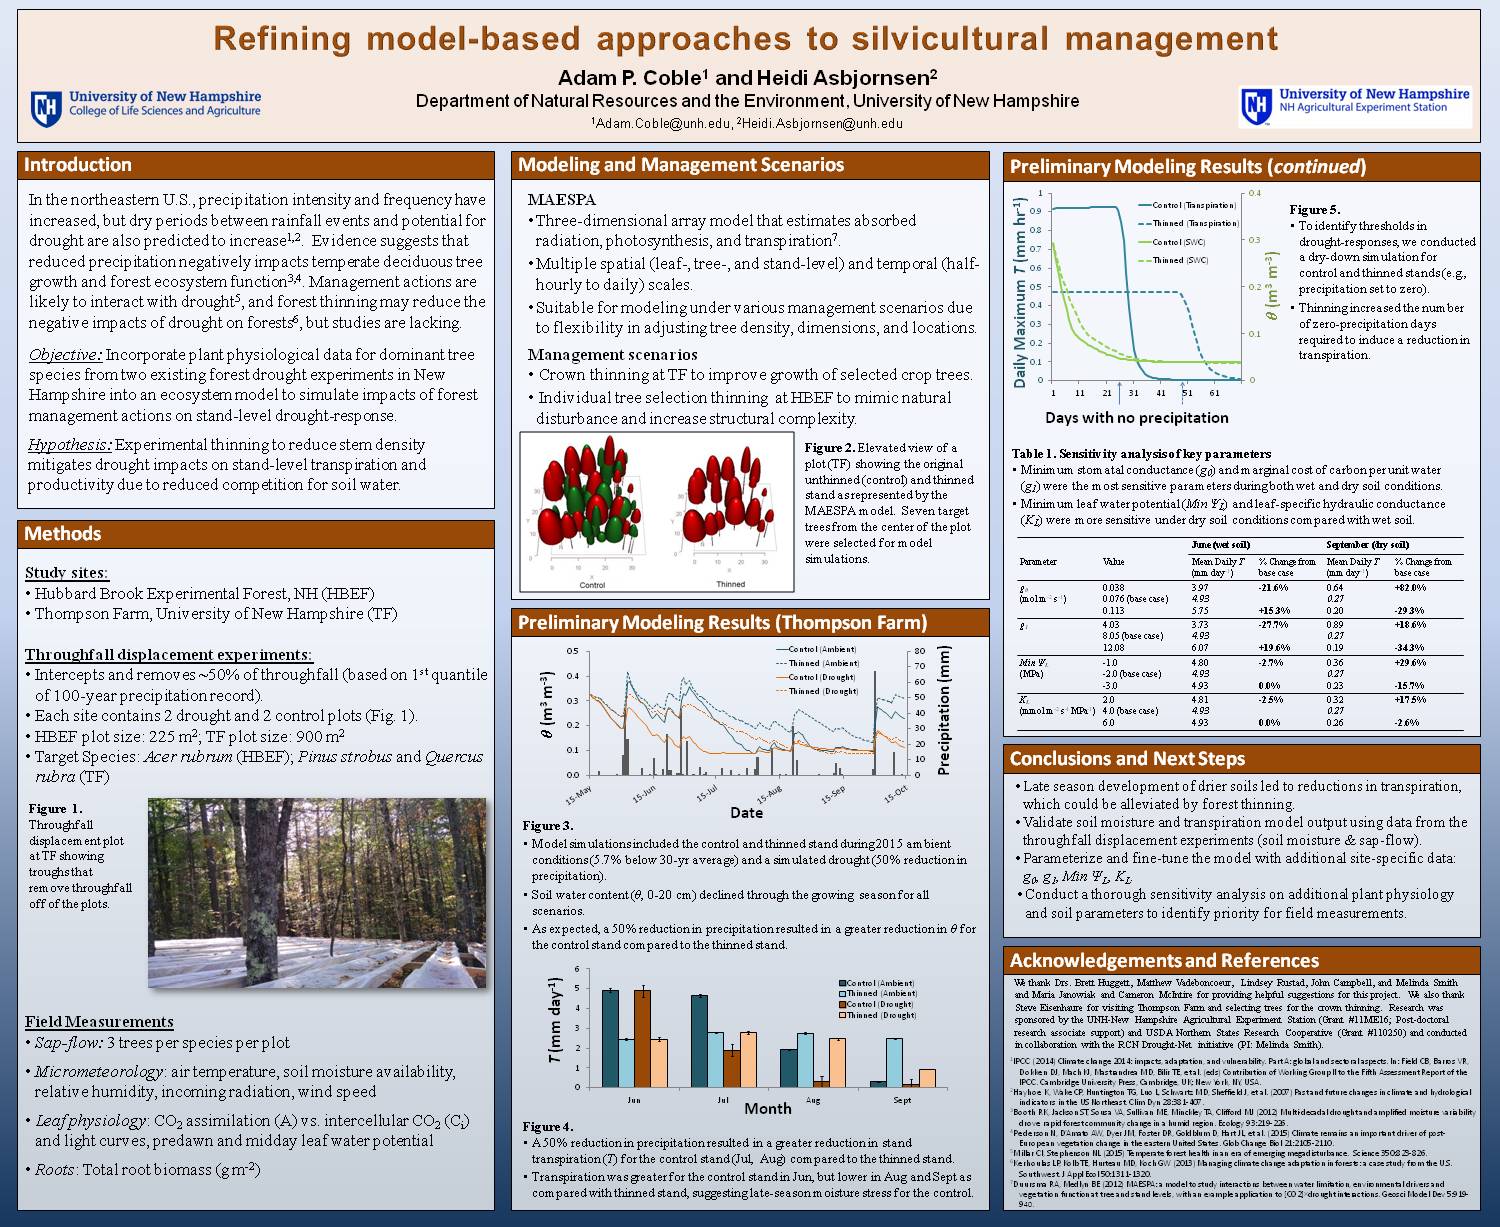 Refining Model-Based Approaches To Silvicultural Management by apc1016